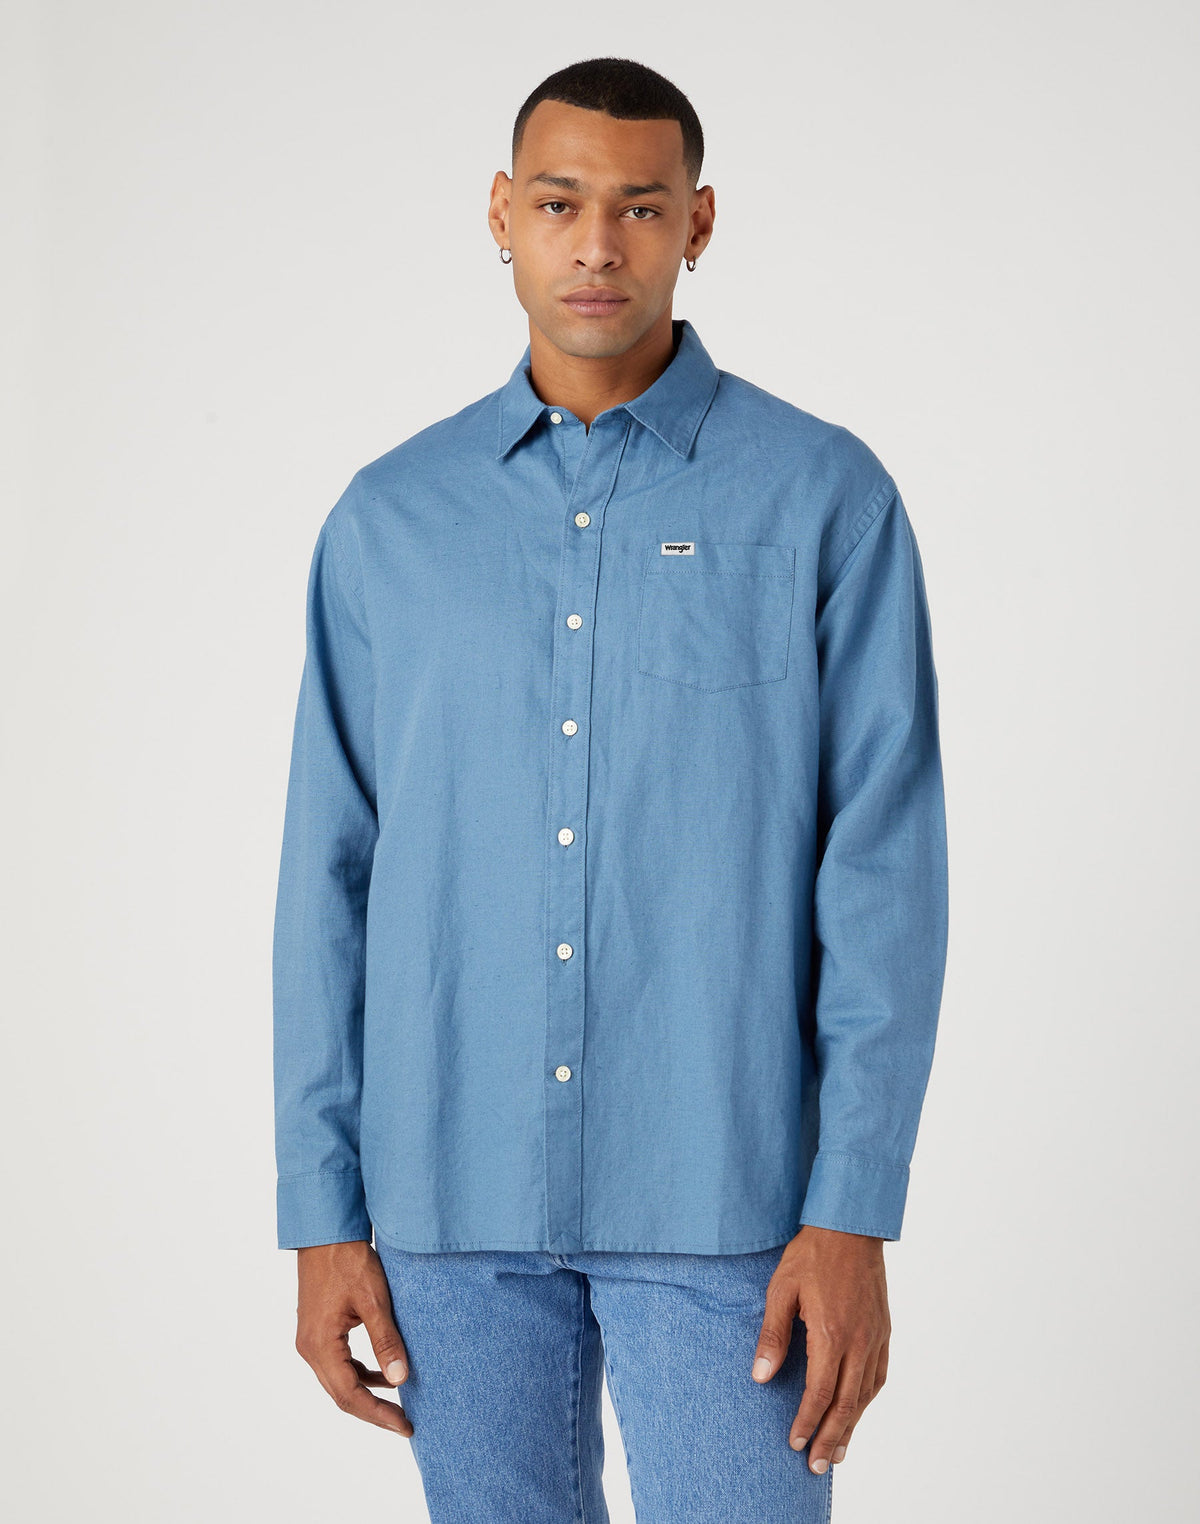 One Pocket Shirt in Captains Blue